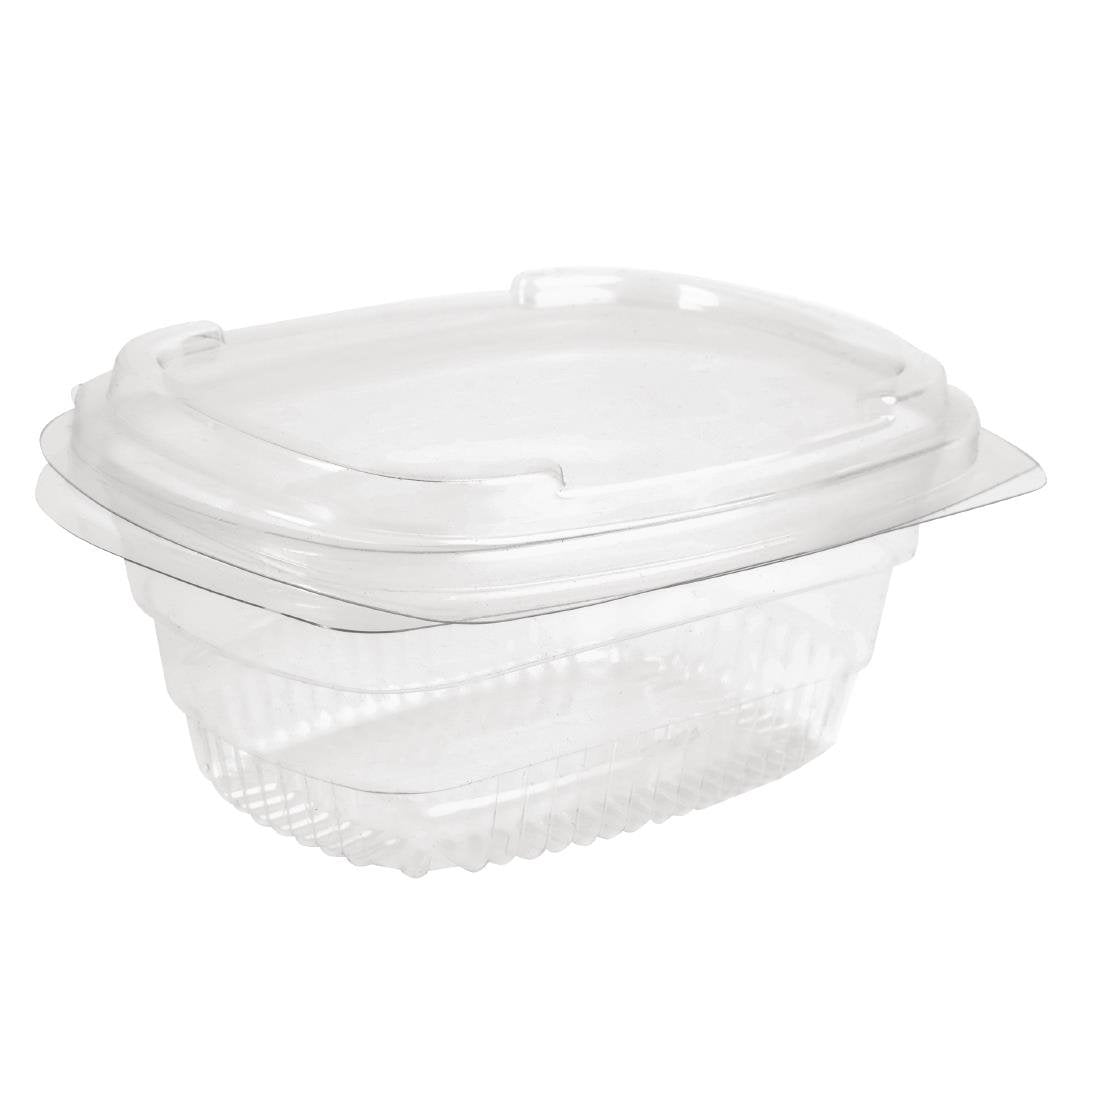 750cc Fresco salad container recyclable x 300